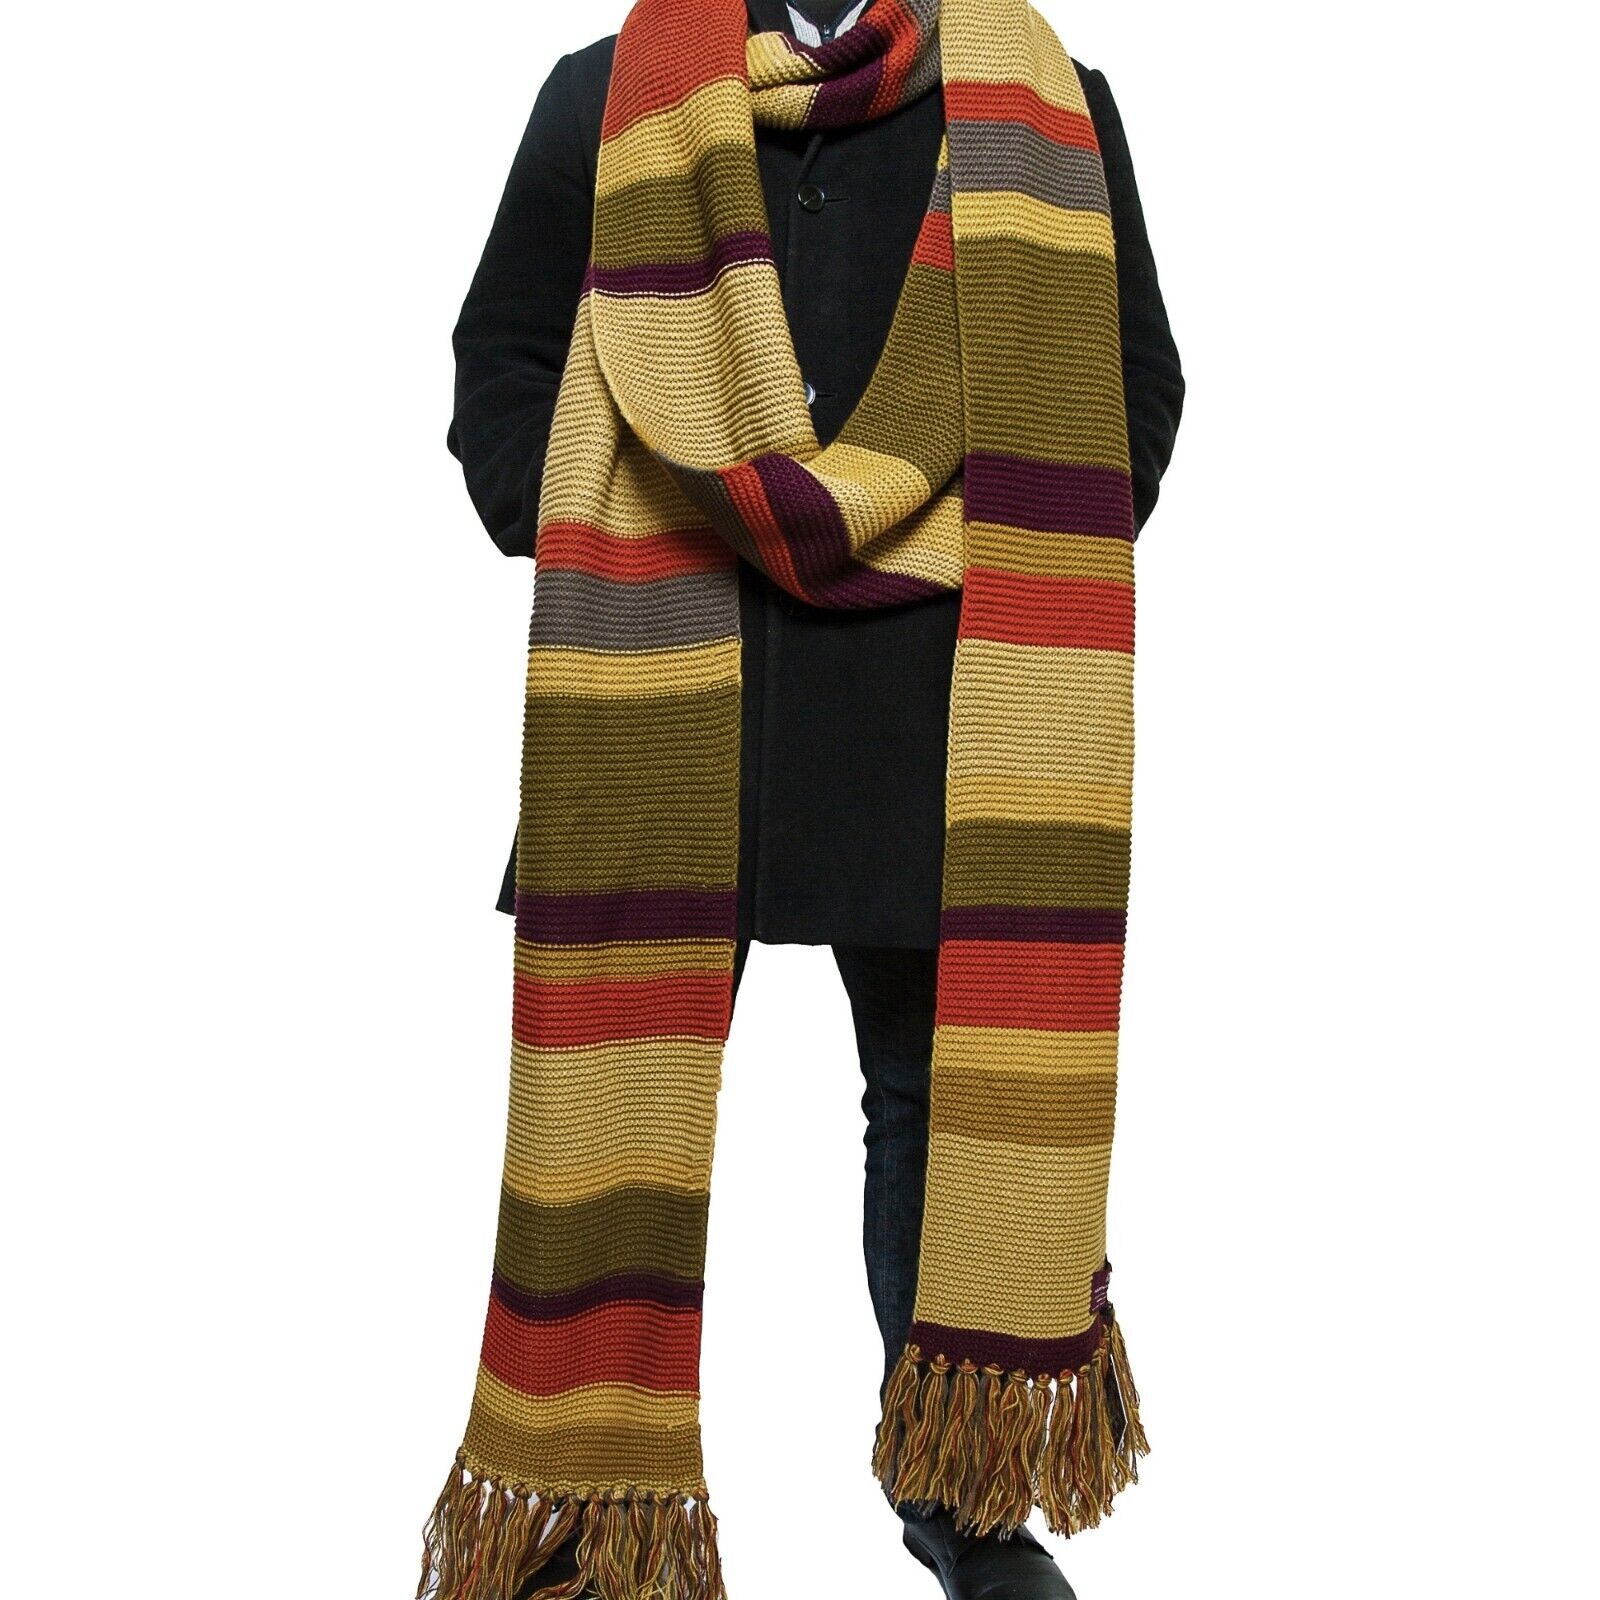 Dr Who Scarf - Tom Baker Season 16-17 18ft - Official BBC Fourth Doctor Scarf